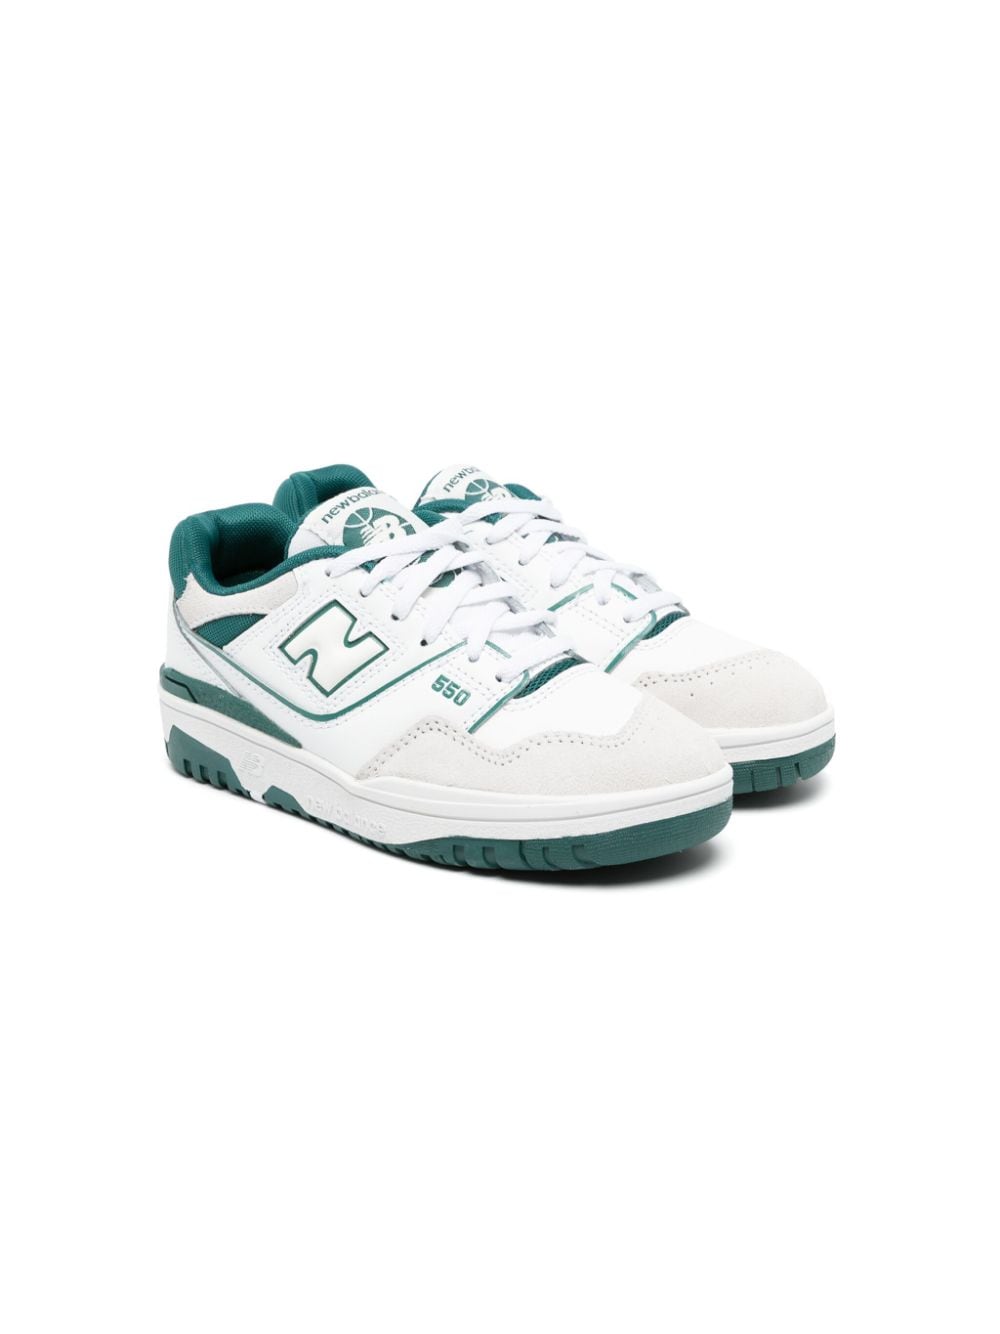 New Balance Kids 550 leather sneakers - White